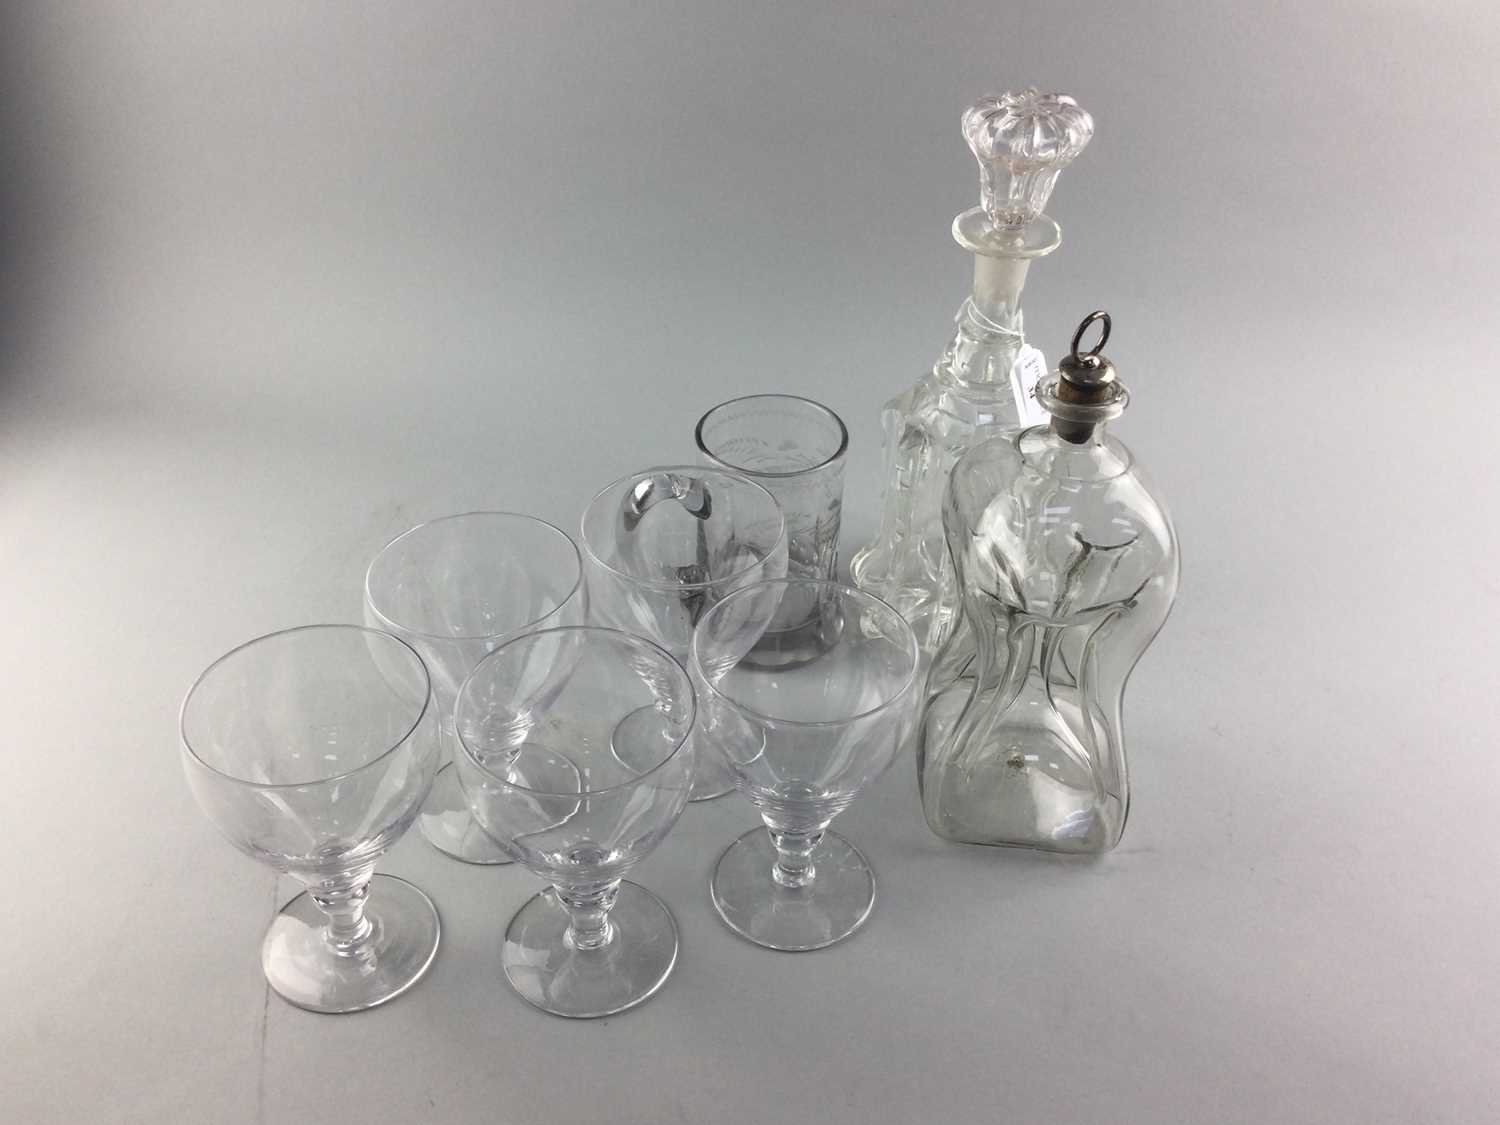 Lot 34 - A VICTORIAN NEWCASTLE GLASS DECANTER AND STOPPER